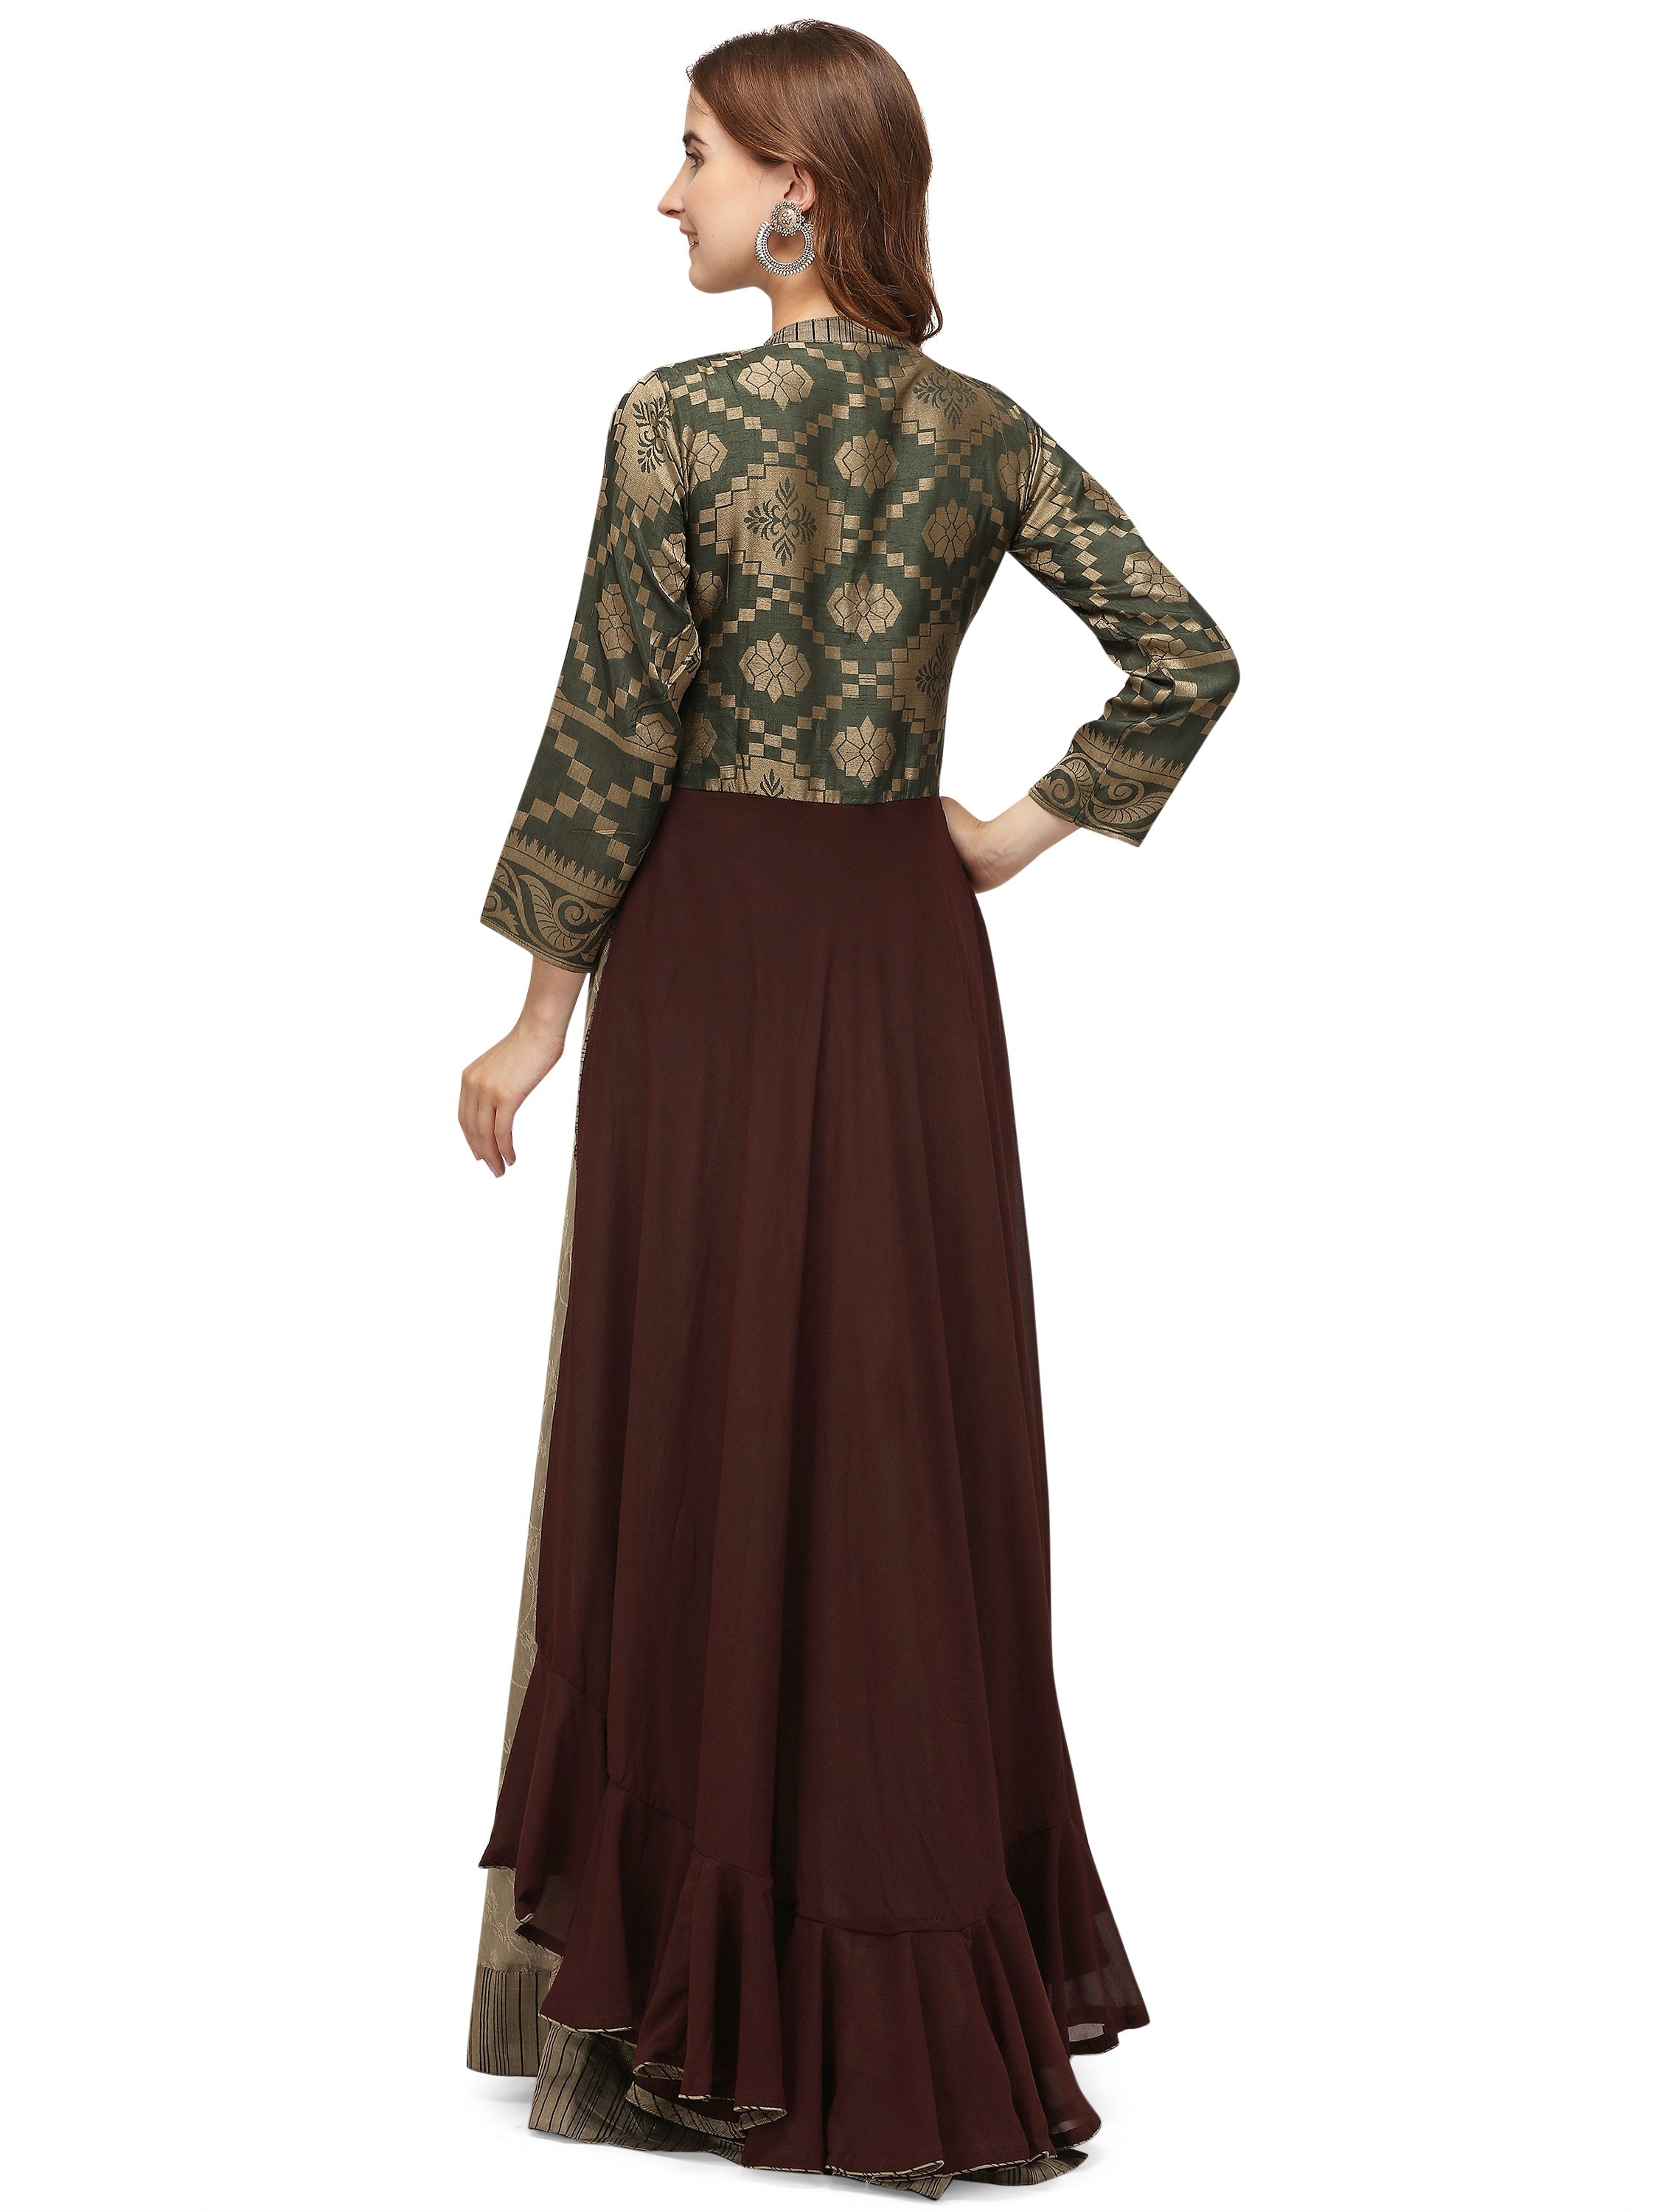 Women's  Multi Color Cotton Silk Printed Gown Ad-2061 - Navyaa